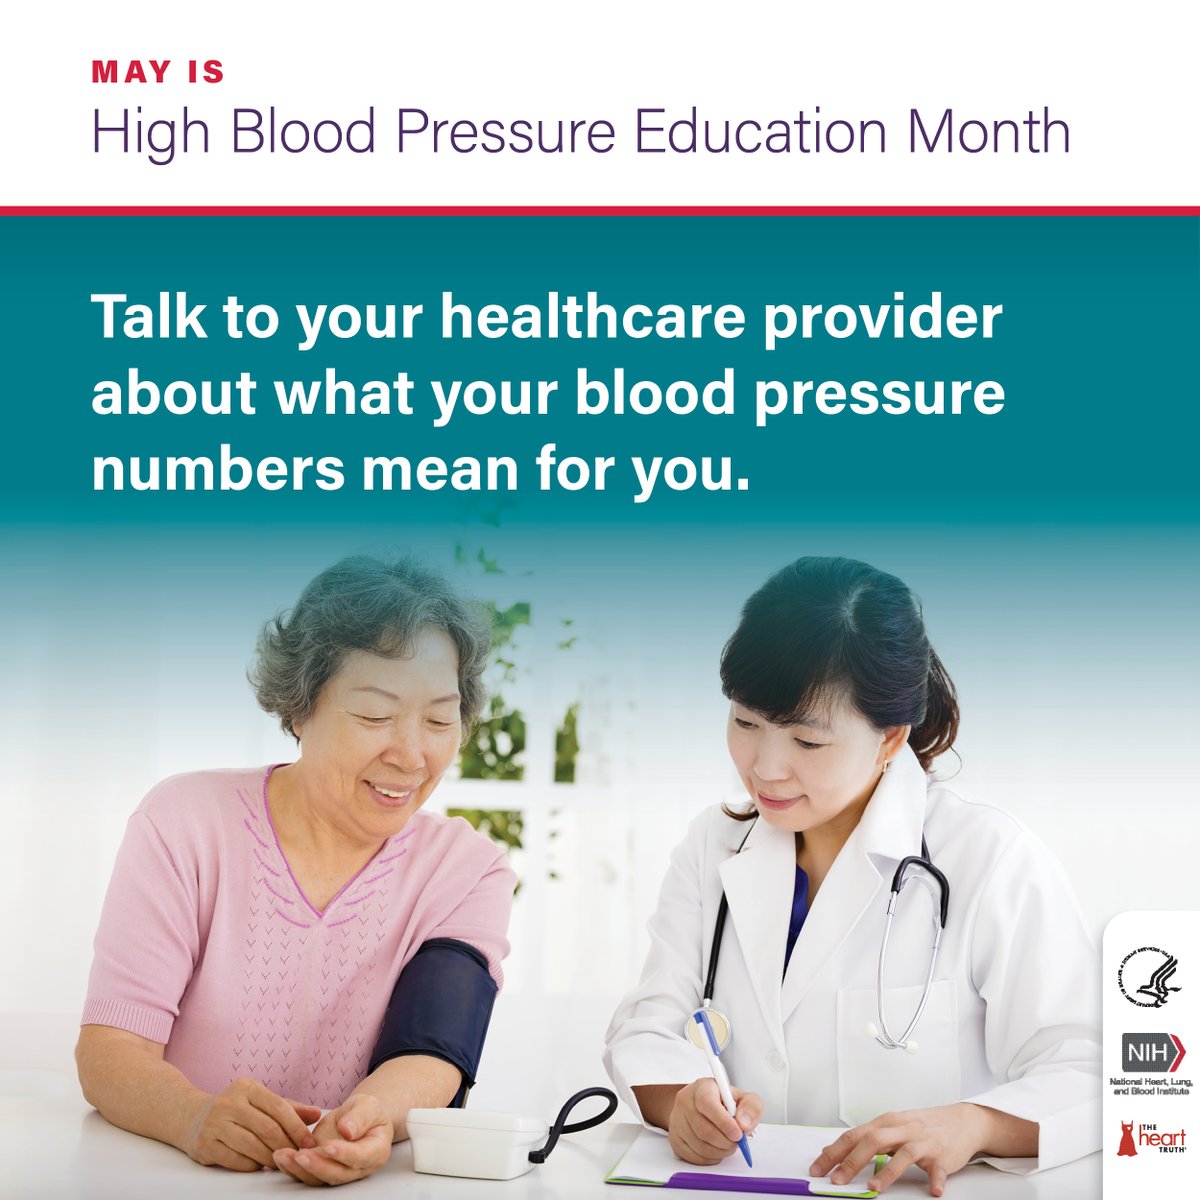 May is #HighBloodPressureMonth! Get your blood pressure checked at every doctor's visit and talk to your doctor about what your numbers mean for you. 

go.nih.gov/67mSsBJ

From #TheHeartTruth
#CrivitzPharmacy